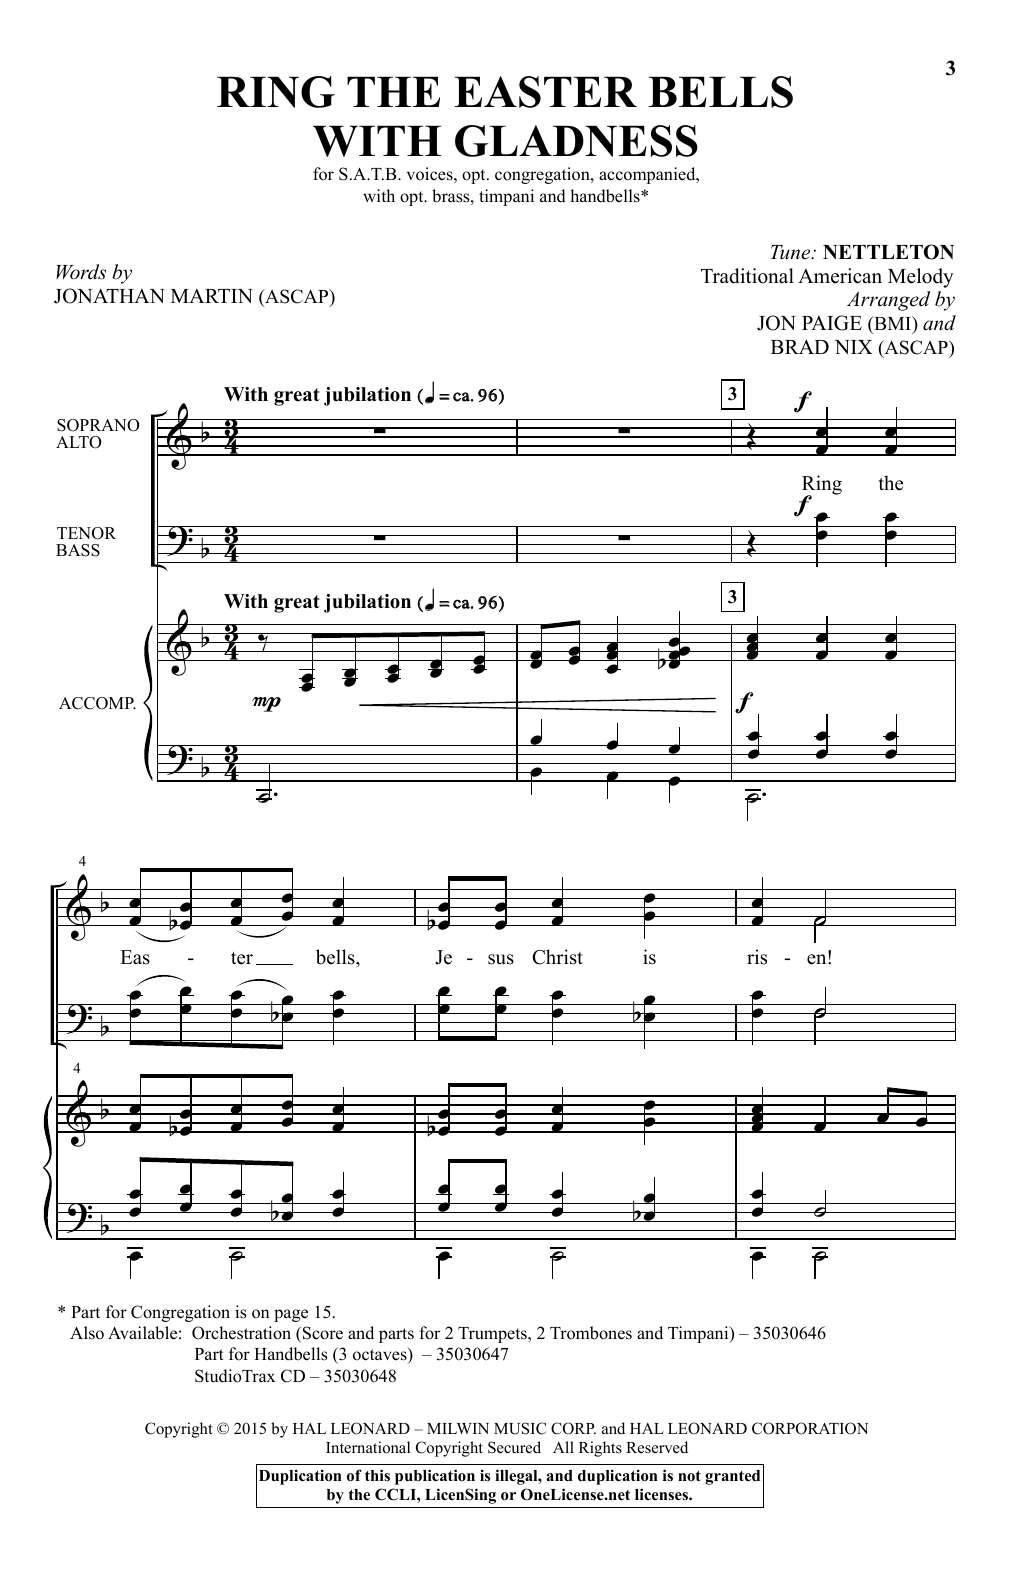 Download Brad Nix Ring The Easter Bells With Gladness Sheet Music